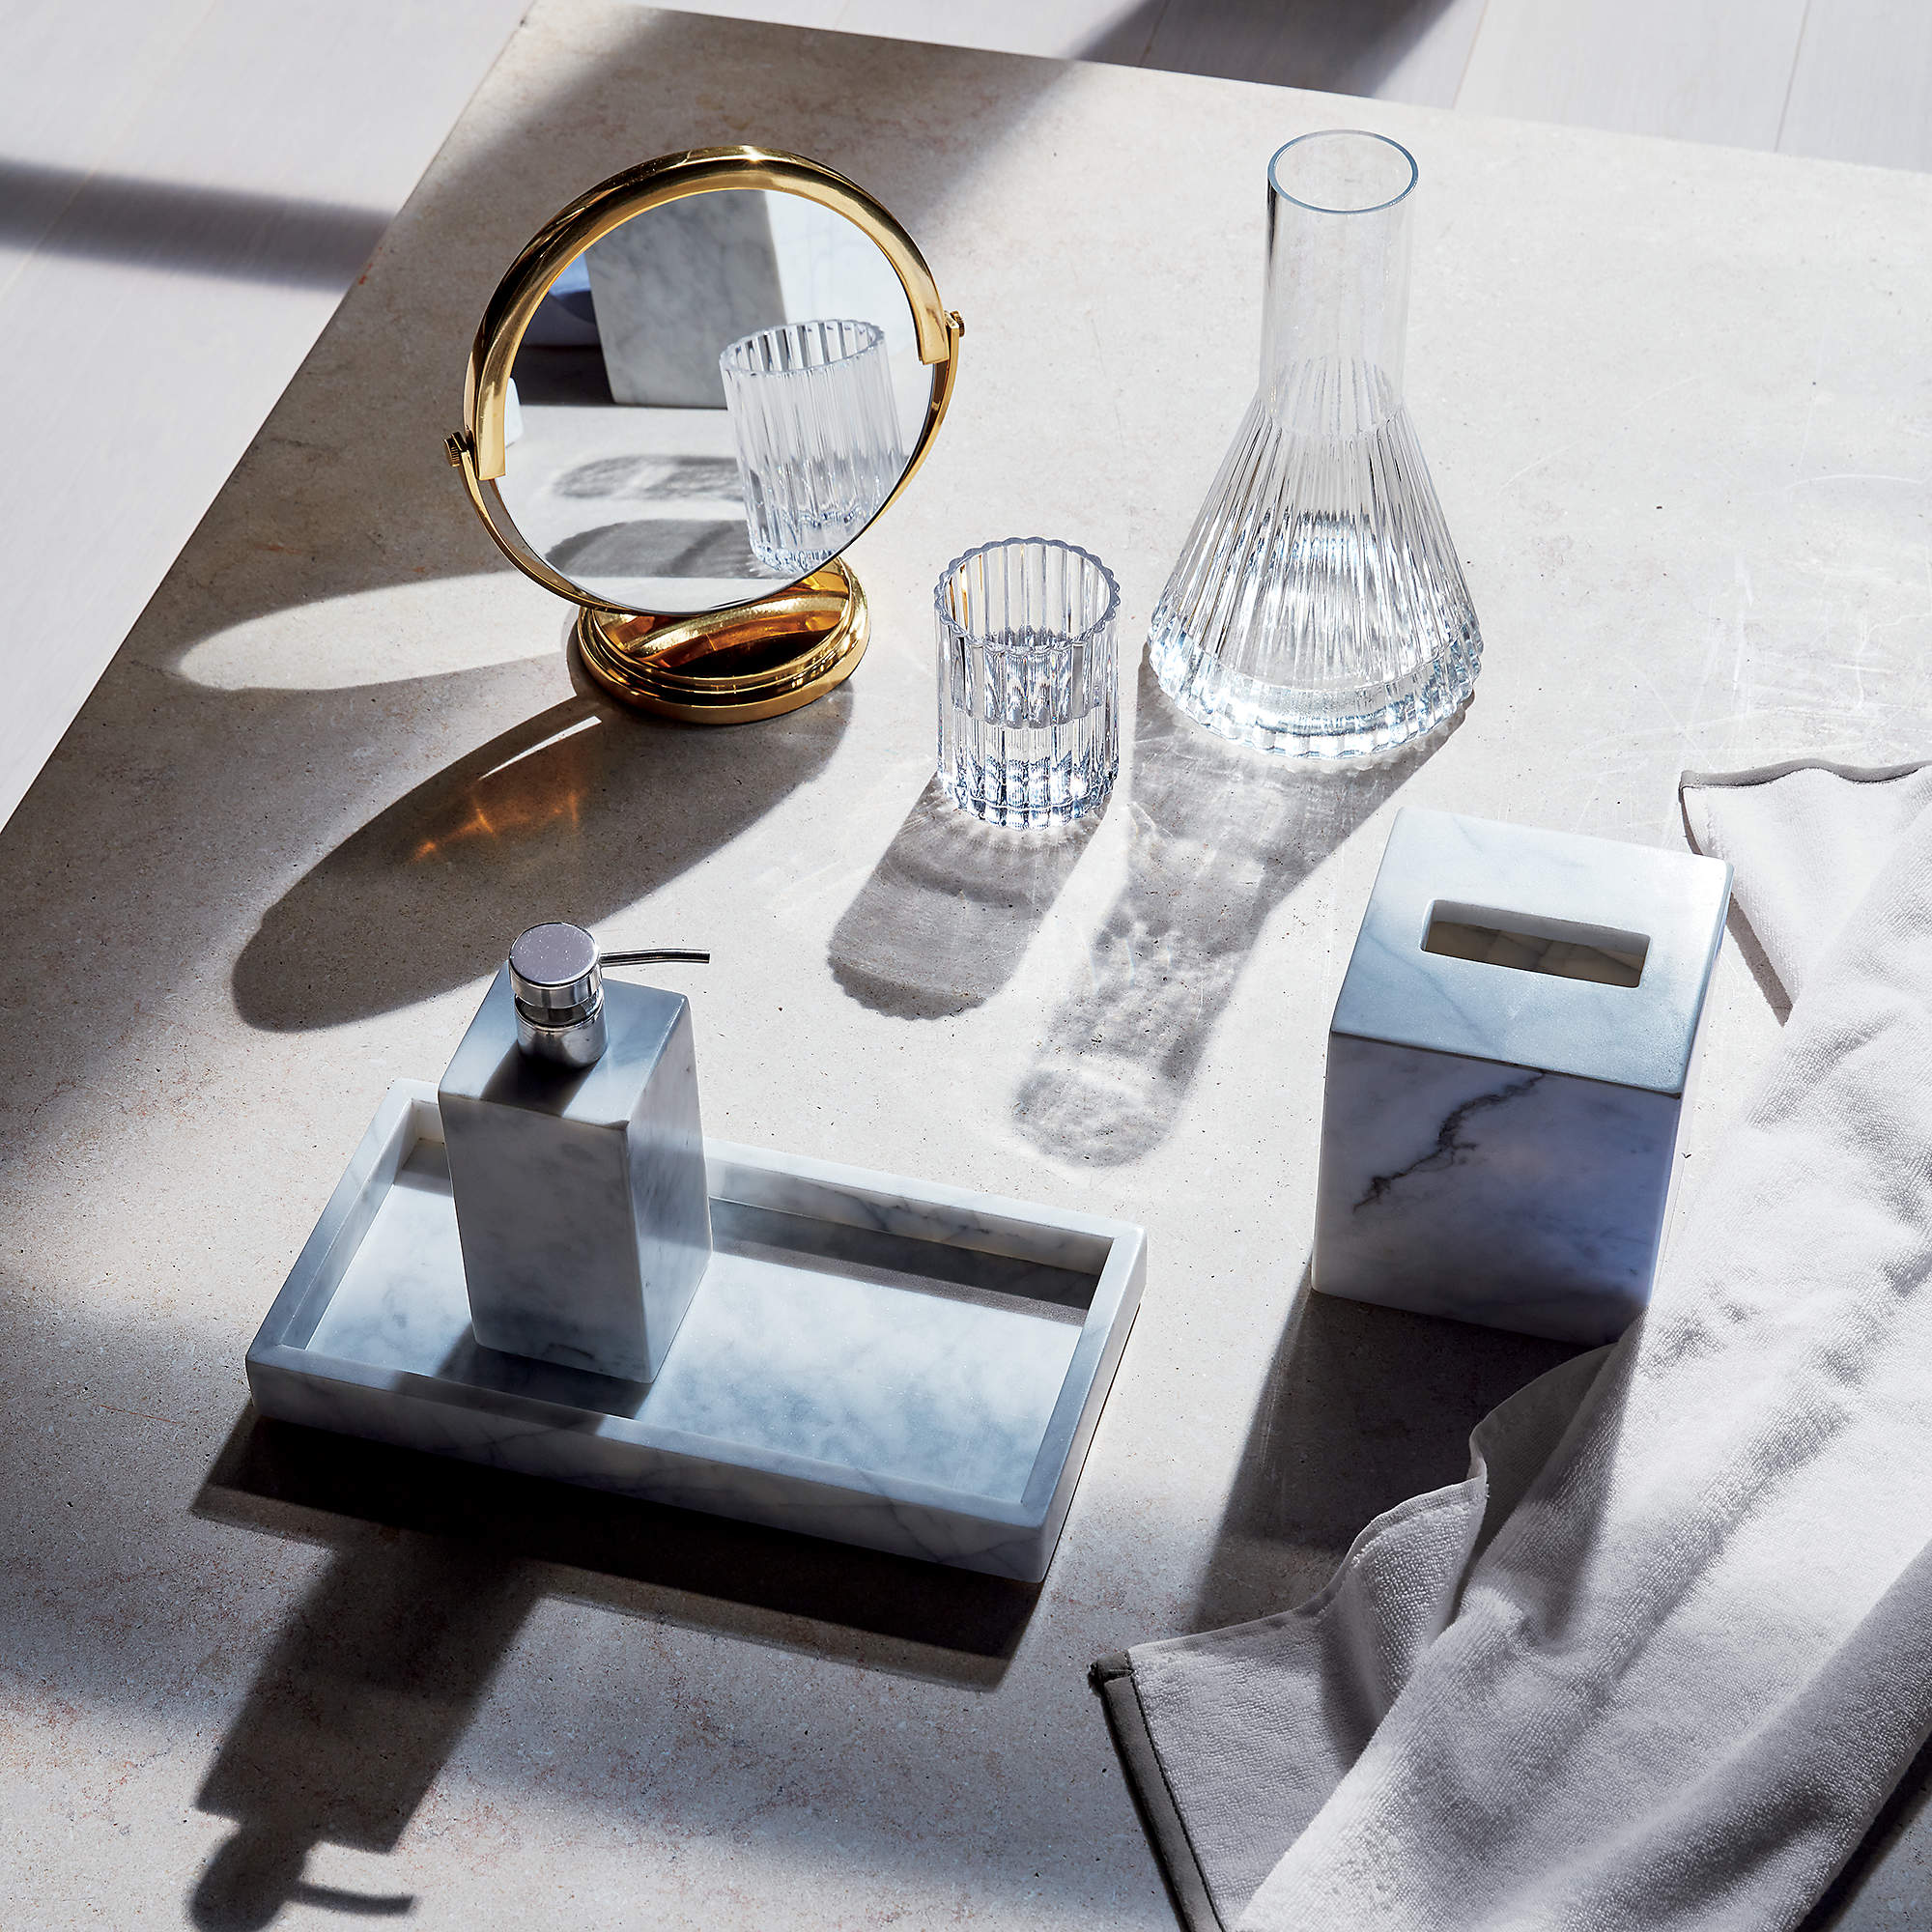 18 Bedside Water Carafes That Double as Decor